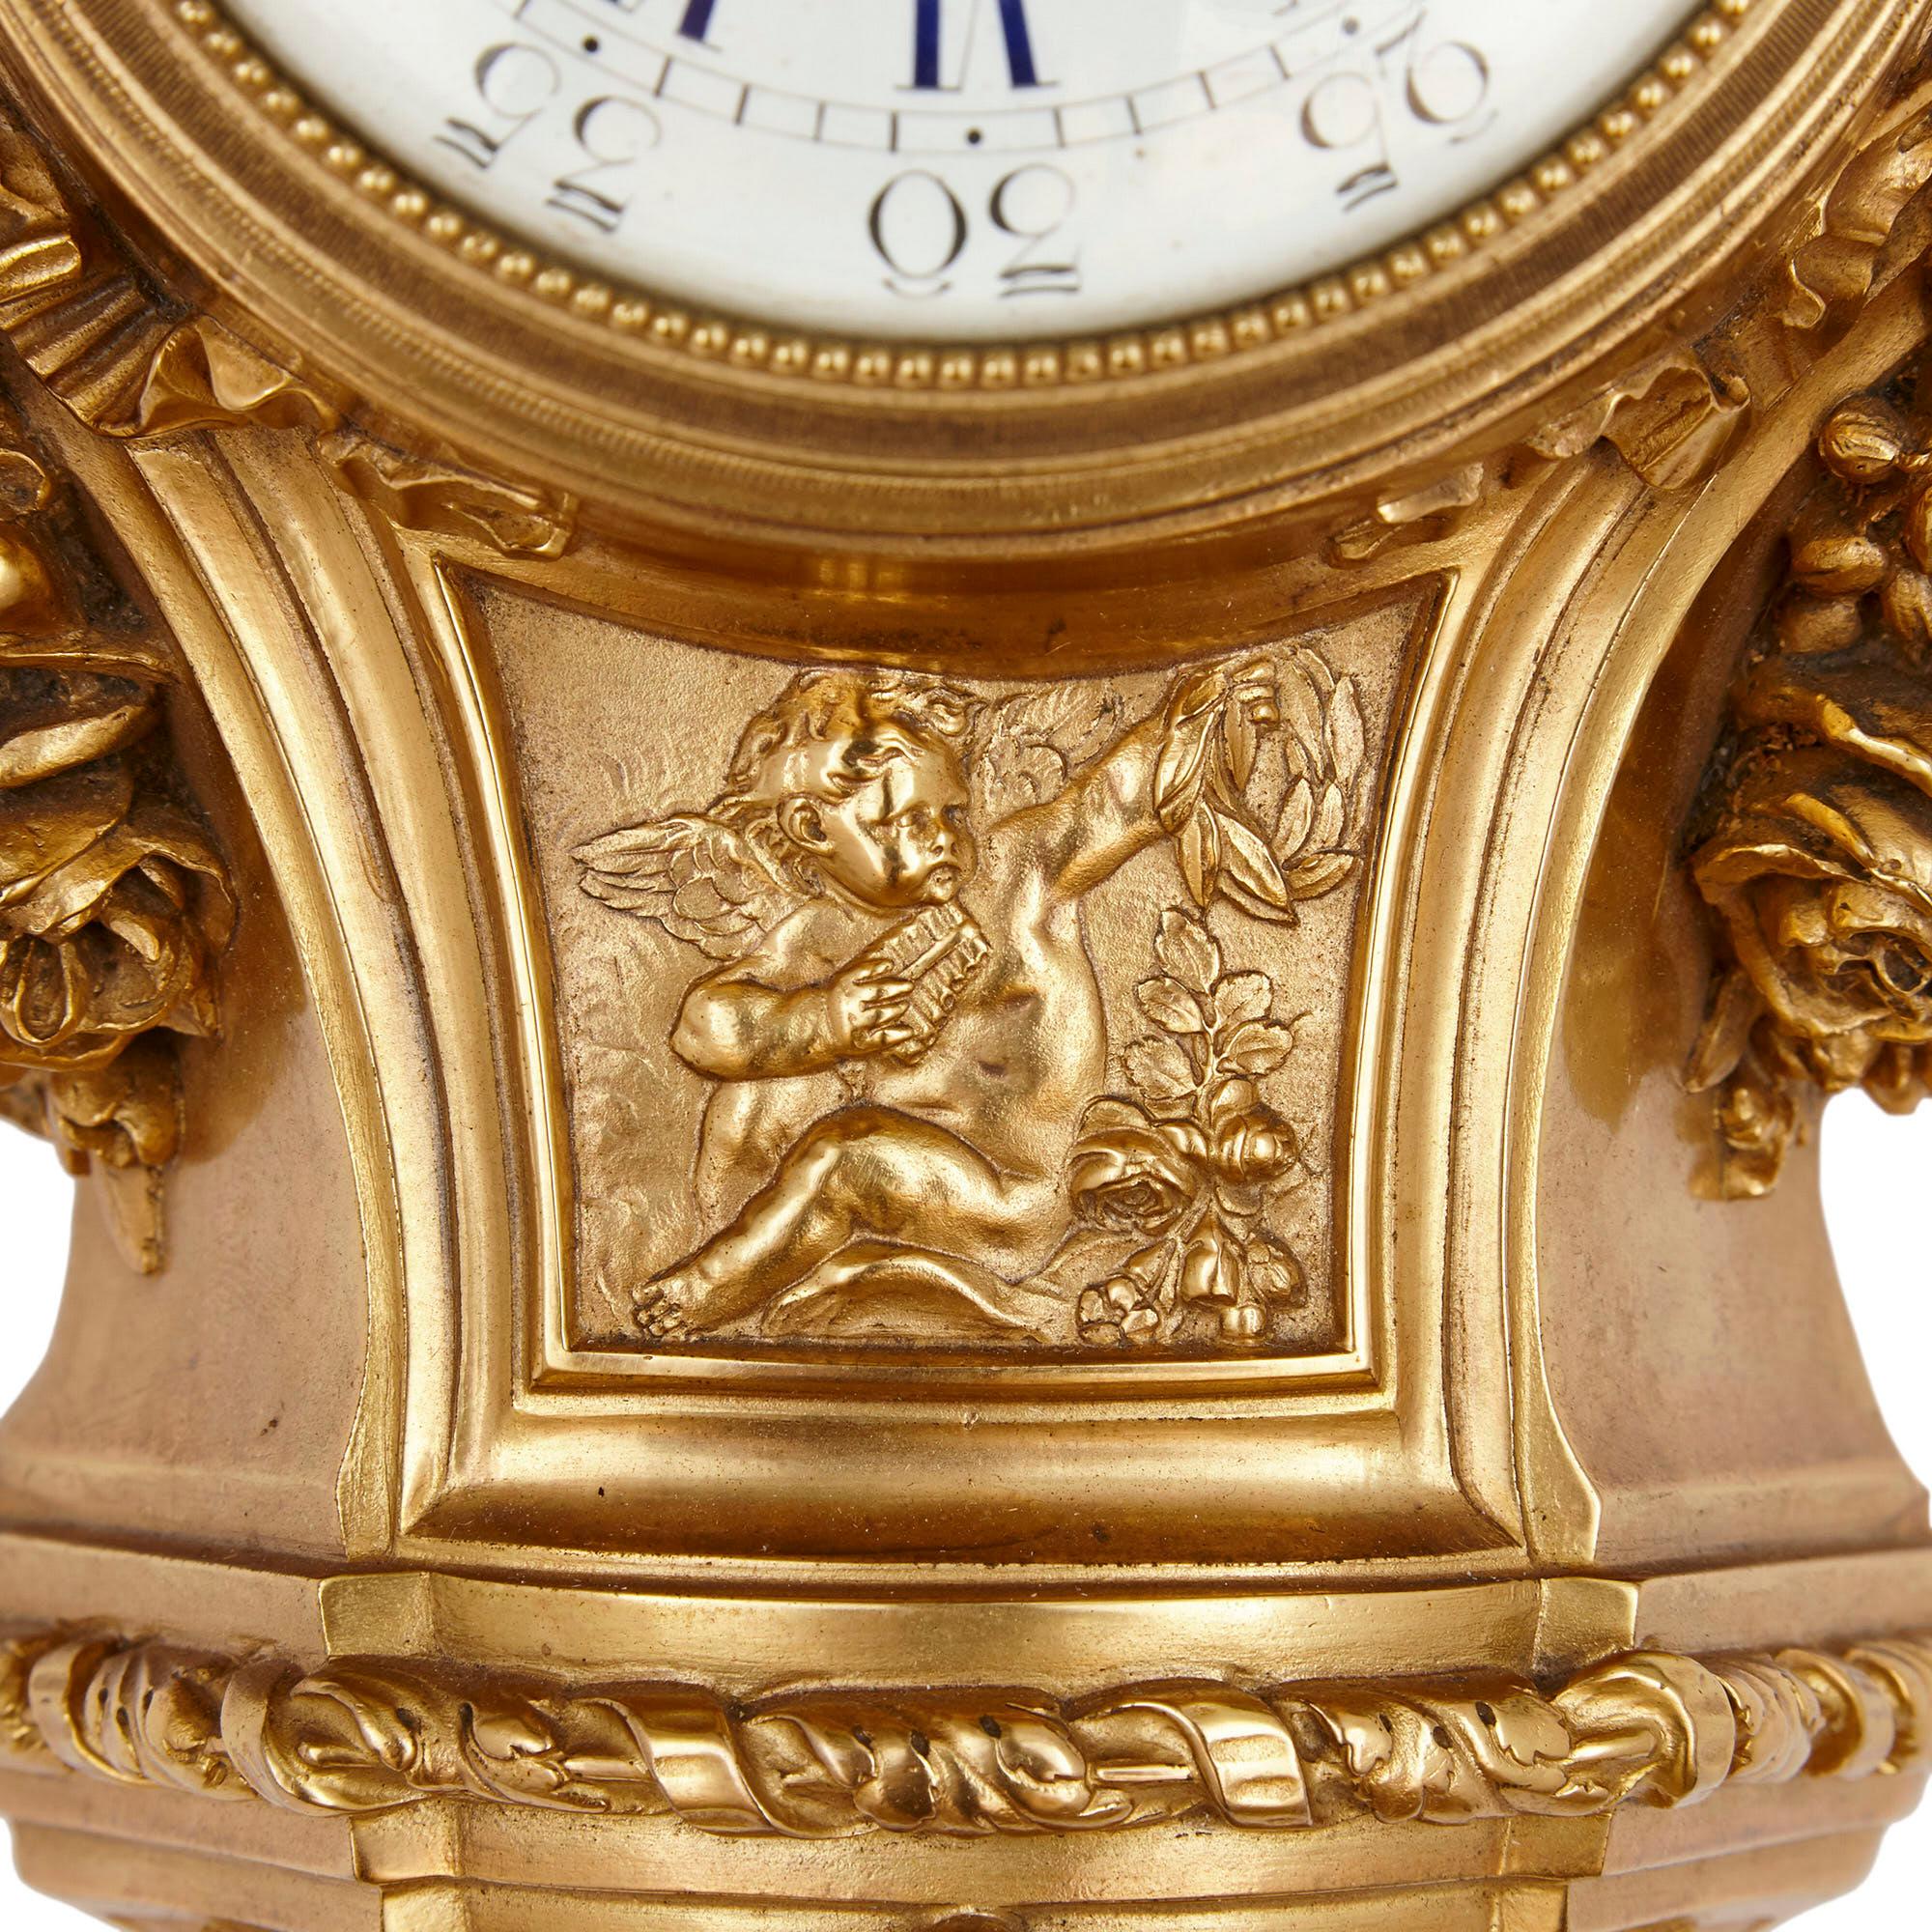 19th Century Neoclassical Gilt Bronze Clock and Barometer Set by Maison Mottheau